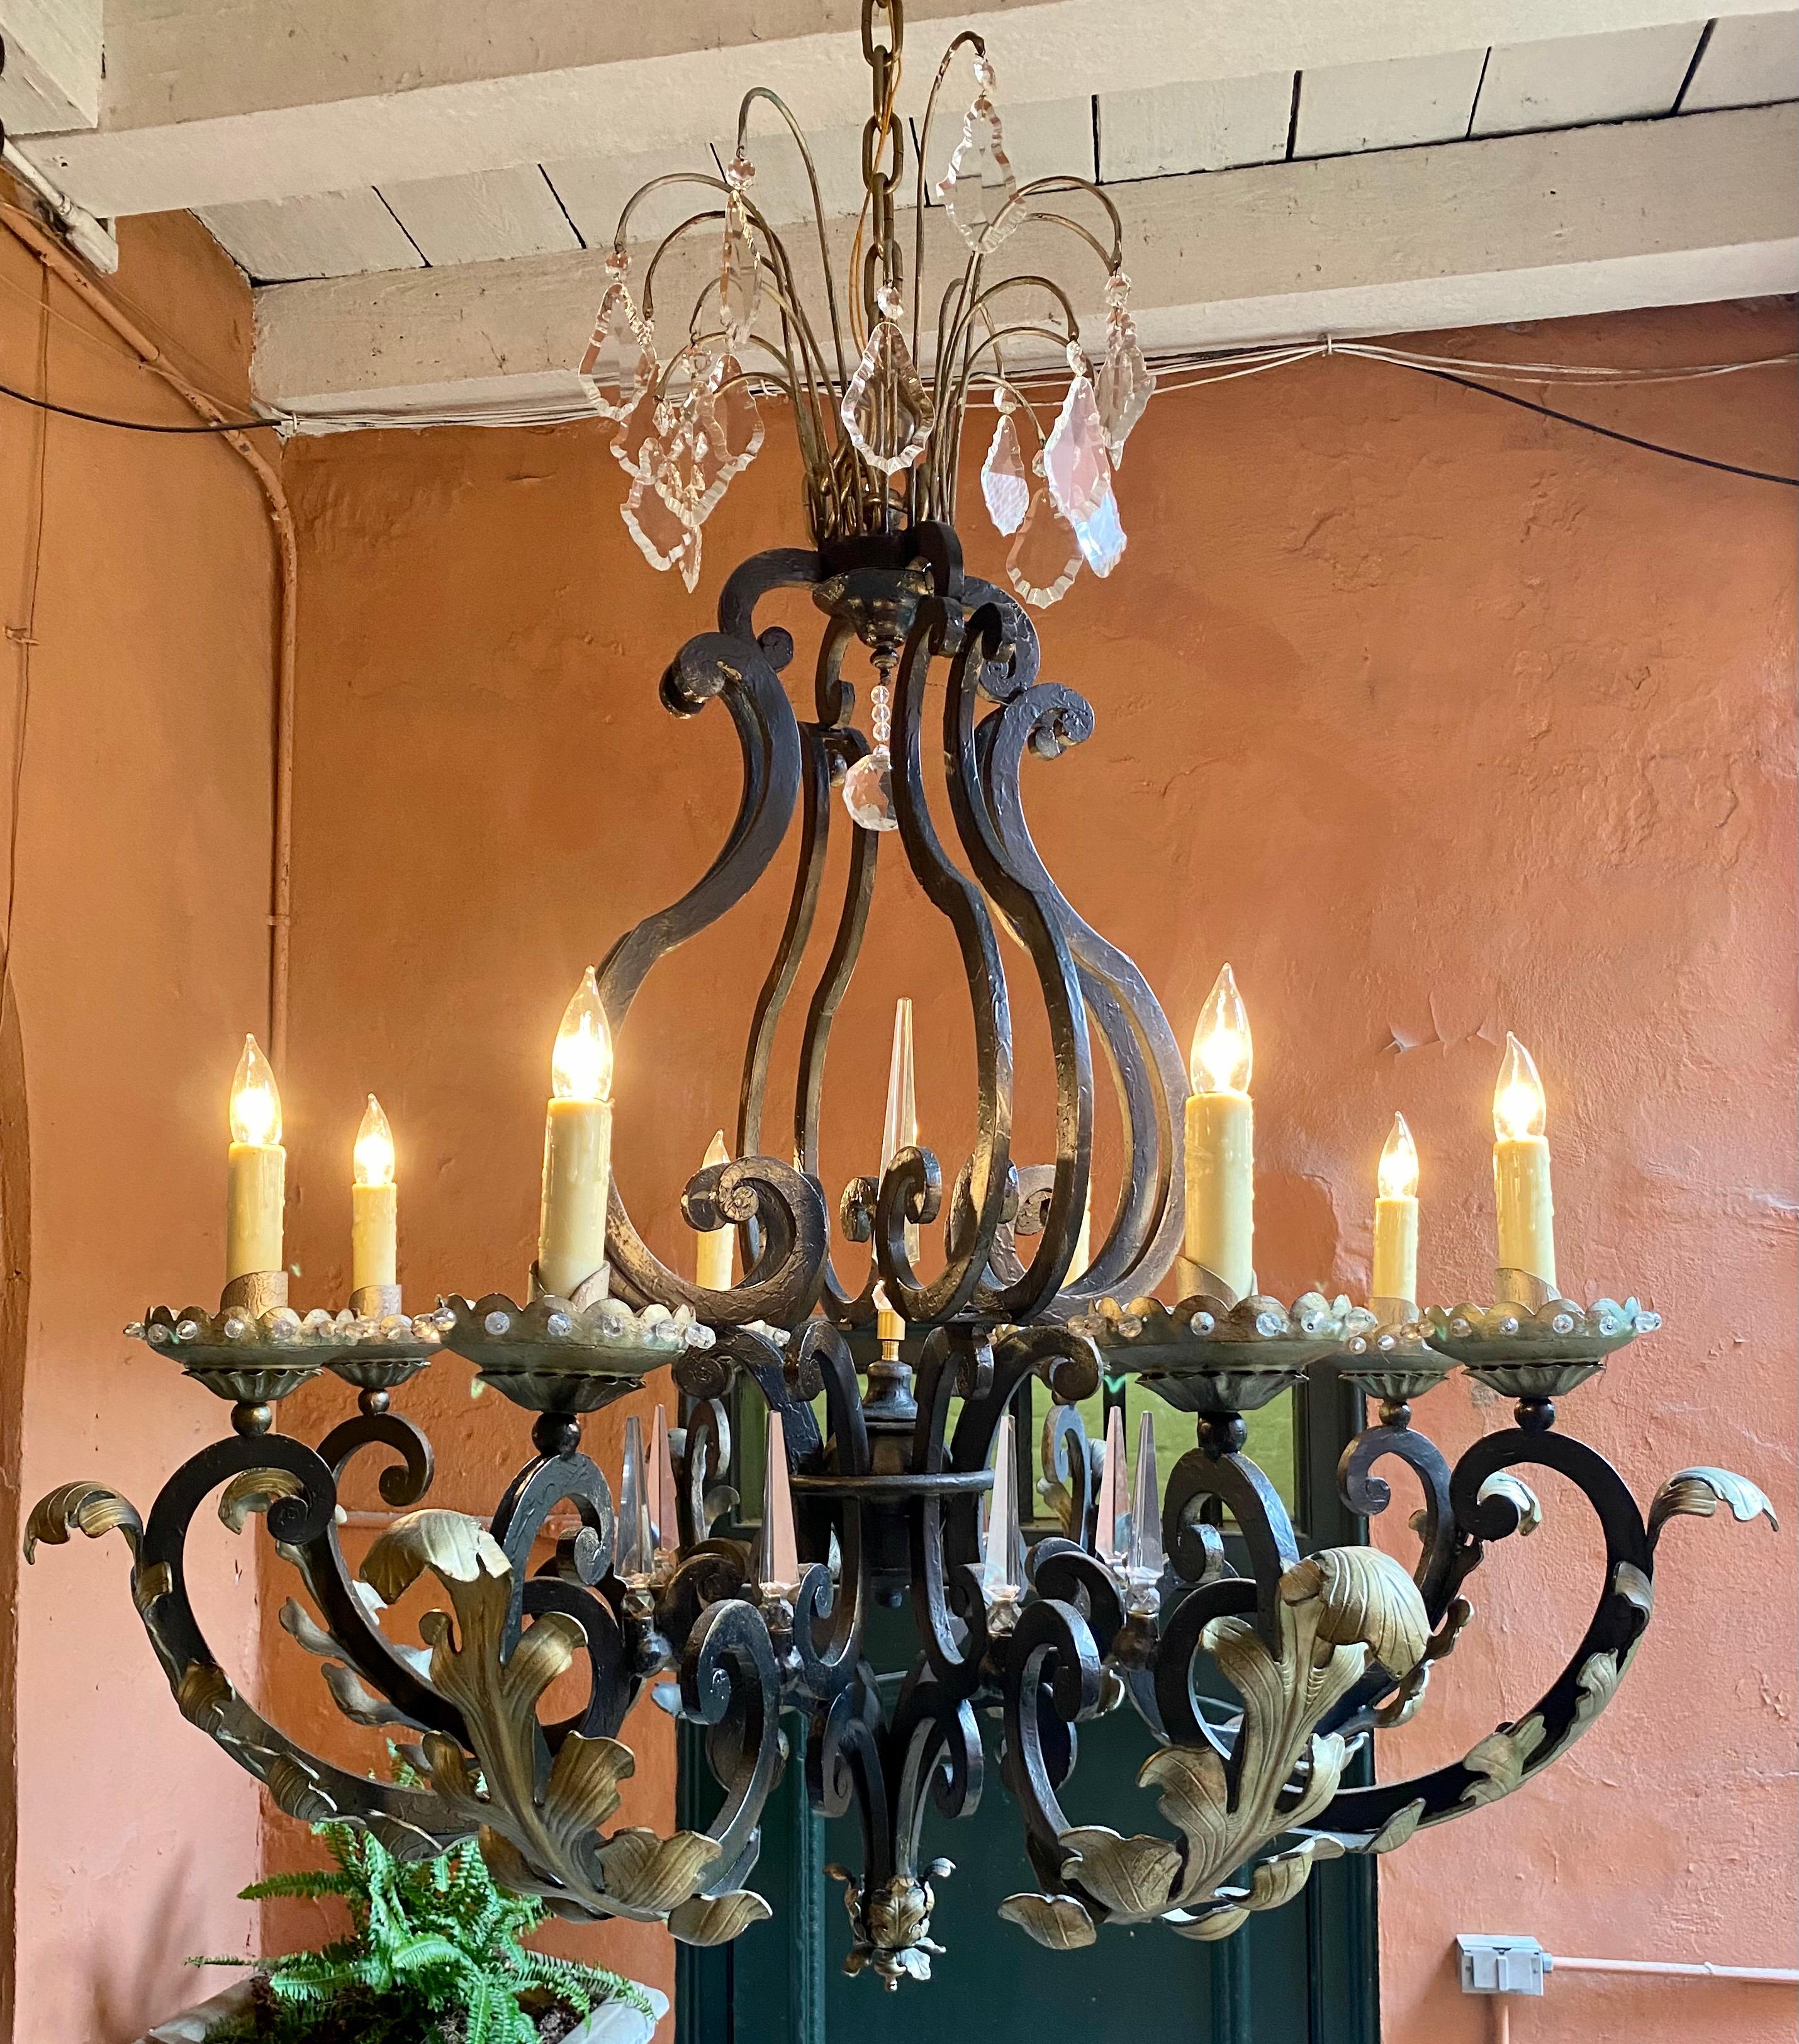 Exceptionally large antique French wrought iron and crystal chandelier, Circa 1900.